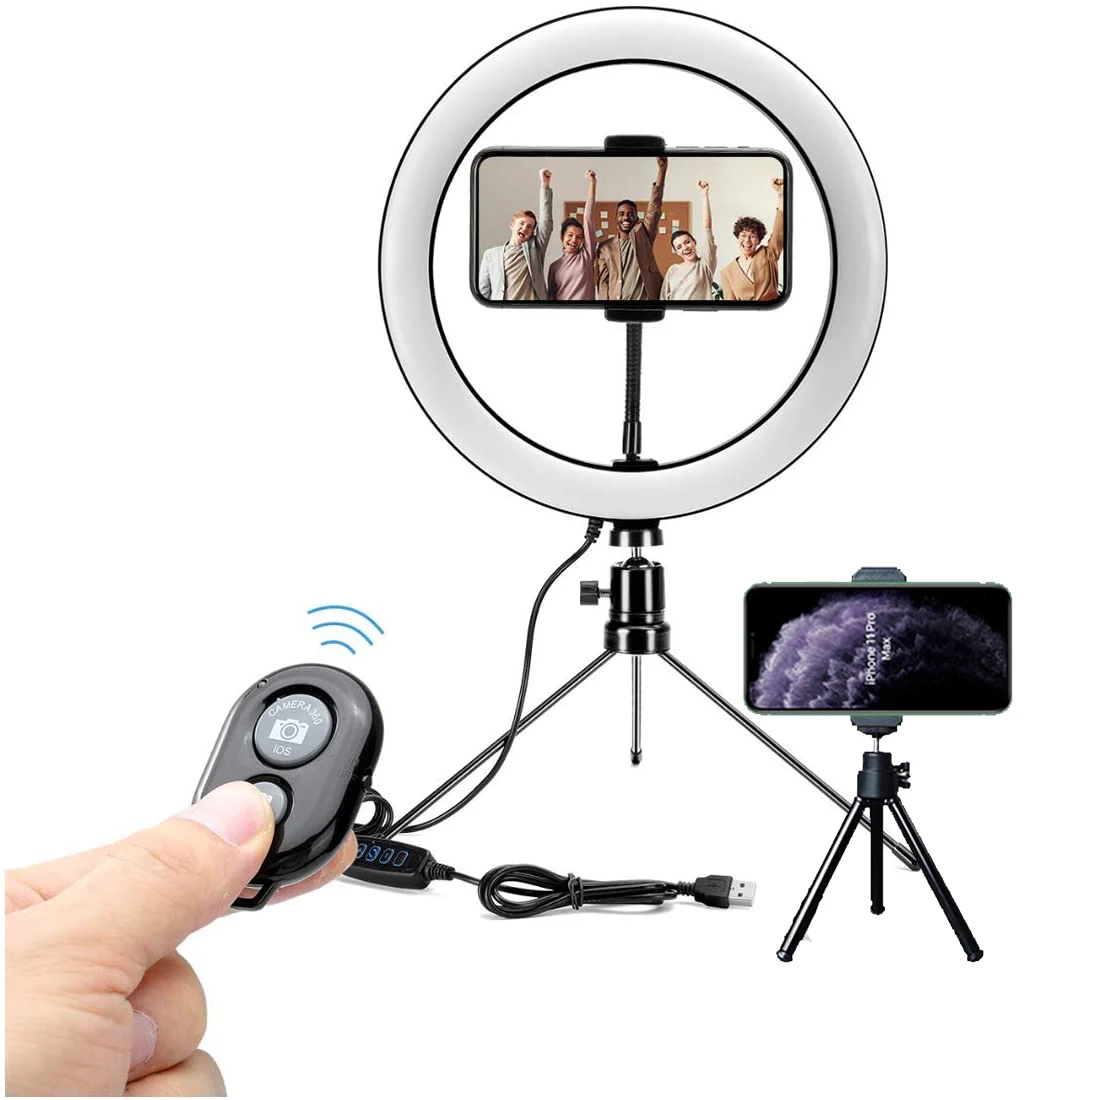 

Makeup Live 10" Fill Ringlight Selfie Circle Light Photography YouTube LED Dimmable Ring Lamp Tripod Stand Phone Holder